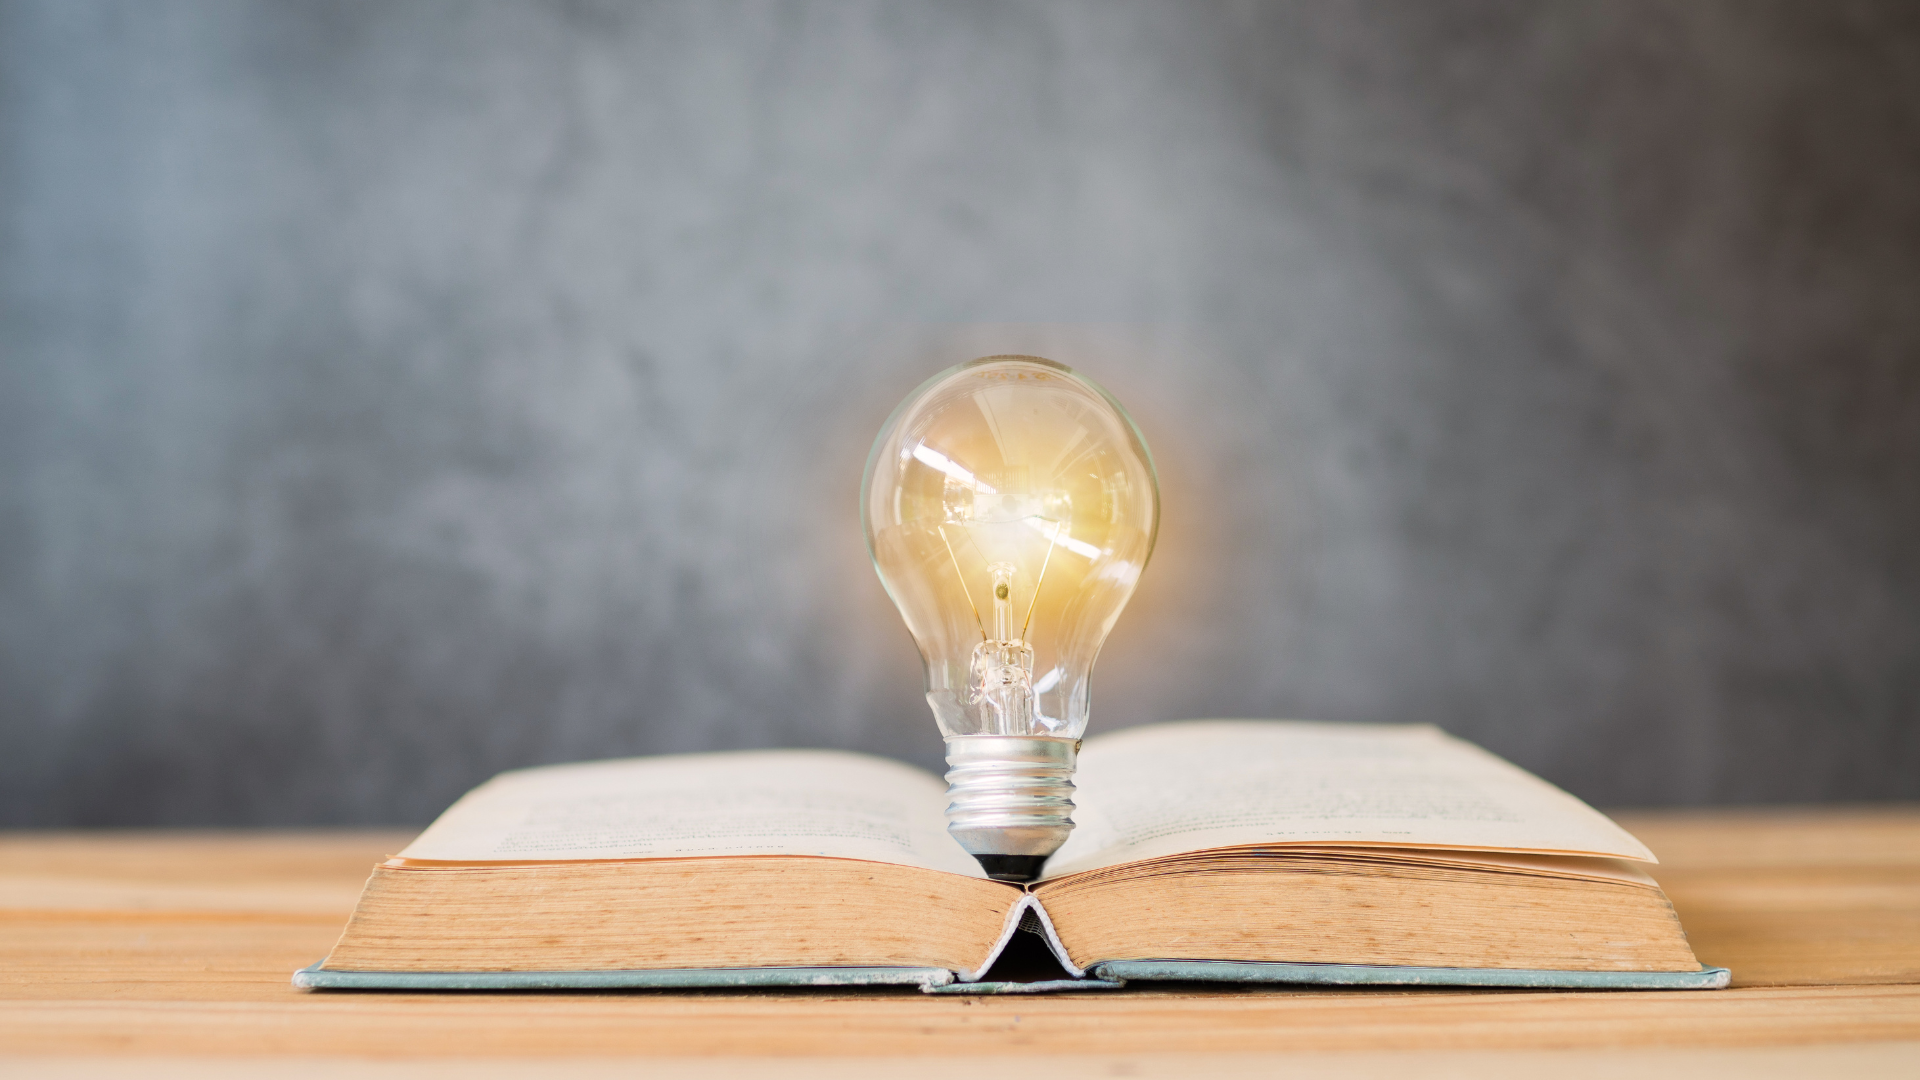 Image of a lightbulb and an open book, symbolizing Rawlings Media's commitment to education and enlightenment through their social media services. The lightbulb represents ideas and creativity, while the book represents knowledge and learning.